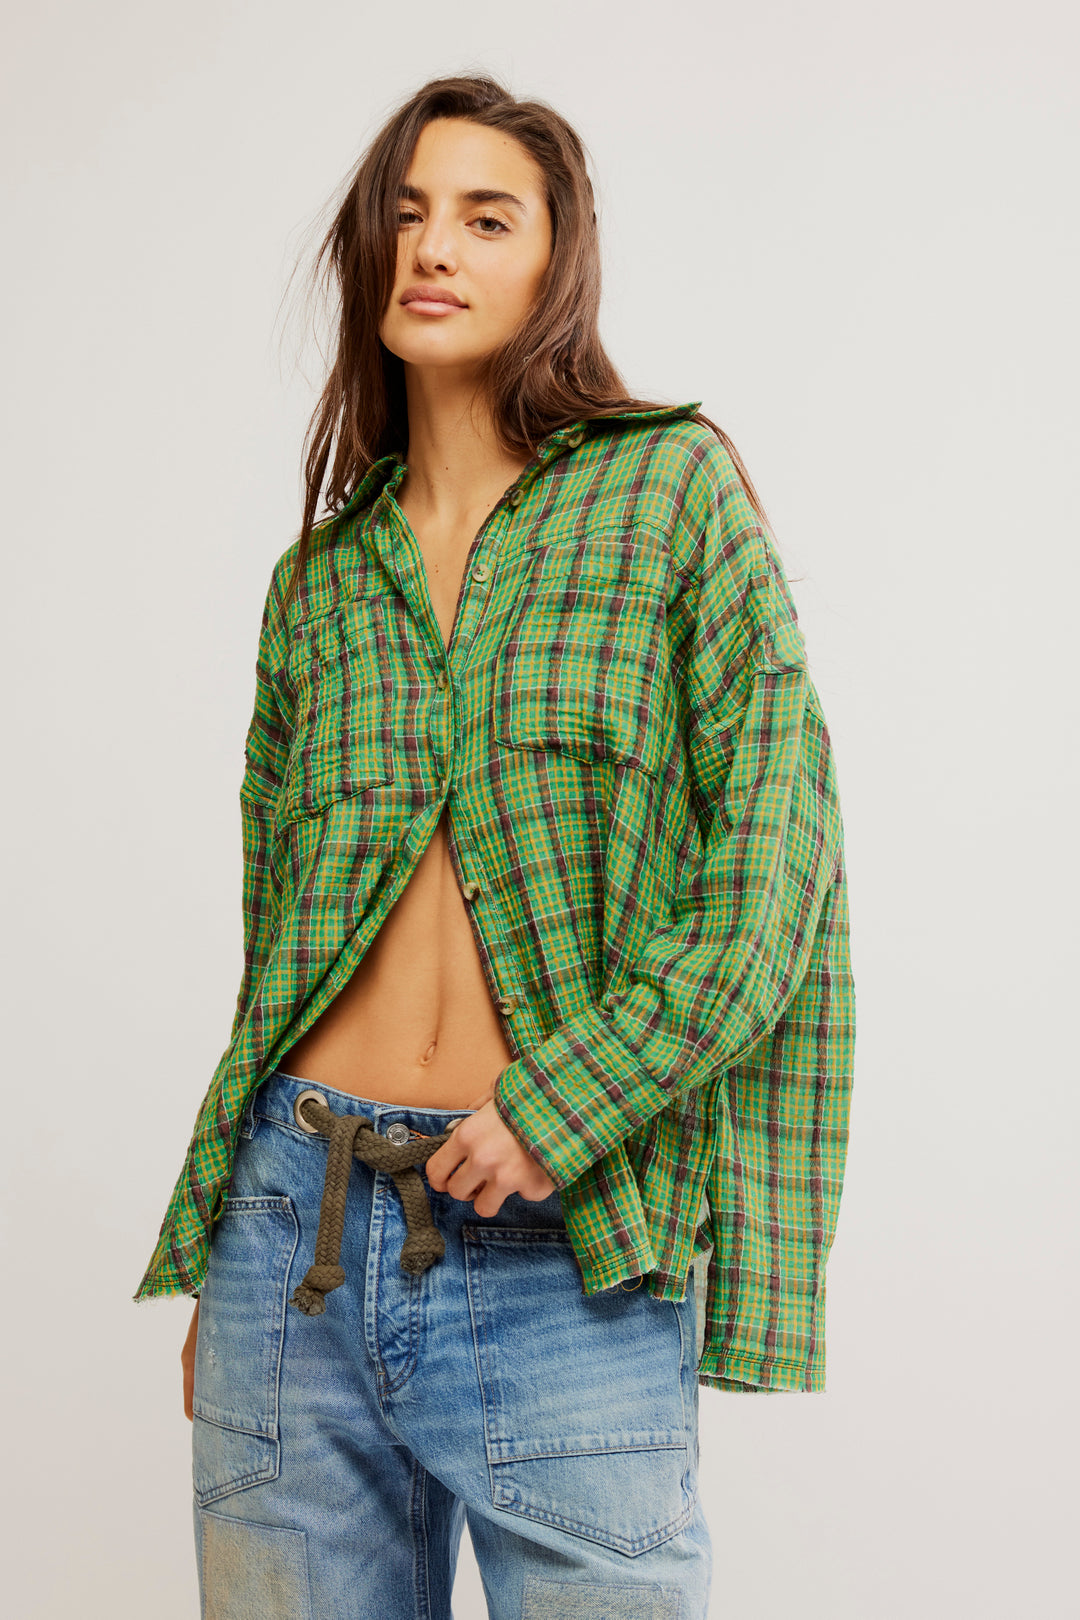 Free People We The Free Cardiff Plaid Top